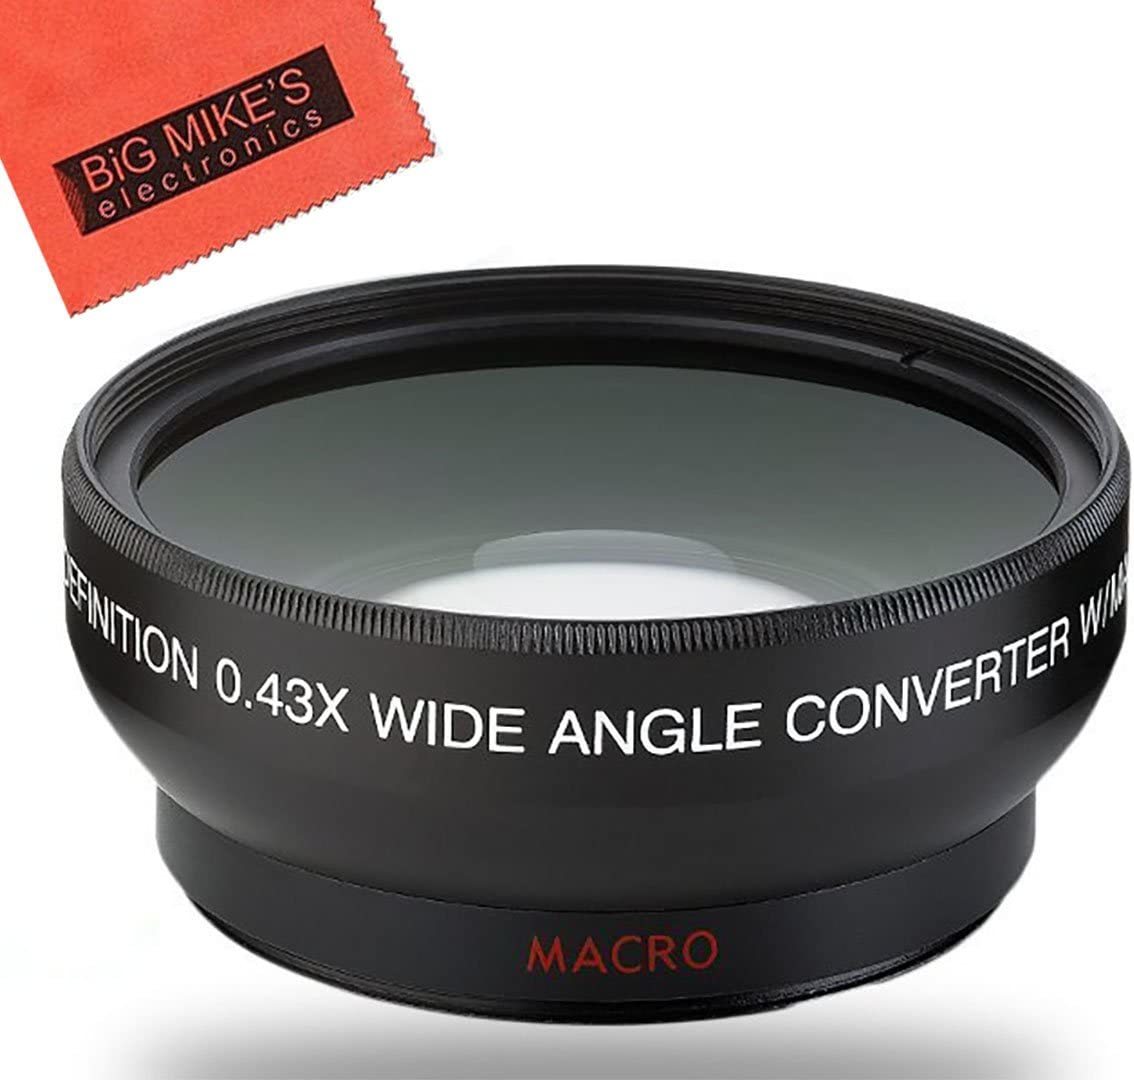 Primary image for 58Mm 0.43X Wide Angle Lens For Canon Digital Eos Rebel Sl1, T1I,, 55Mm Is Ii,